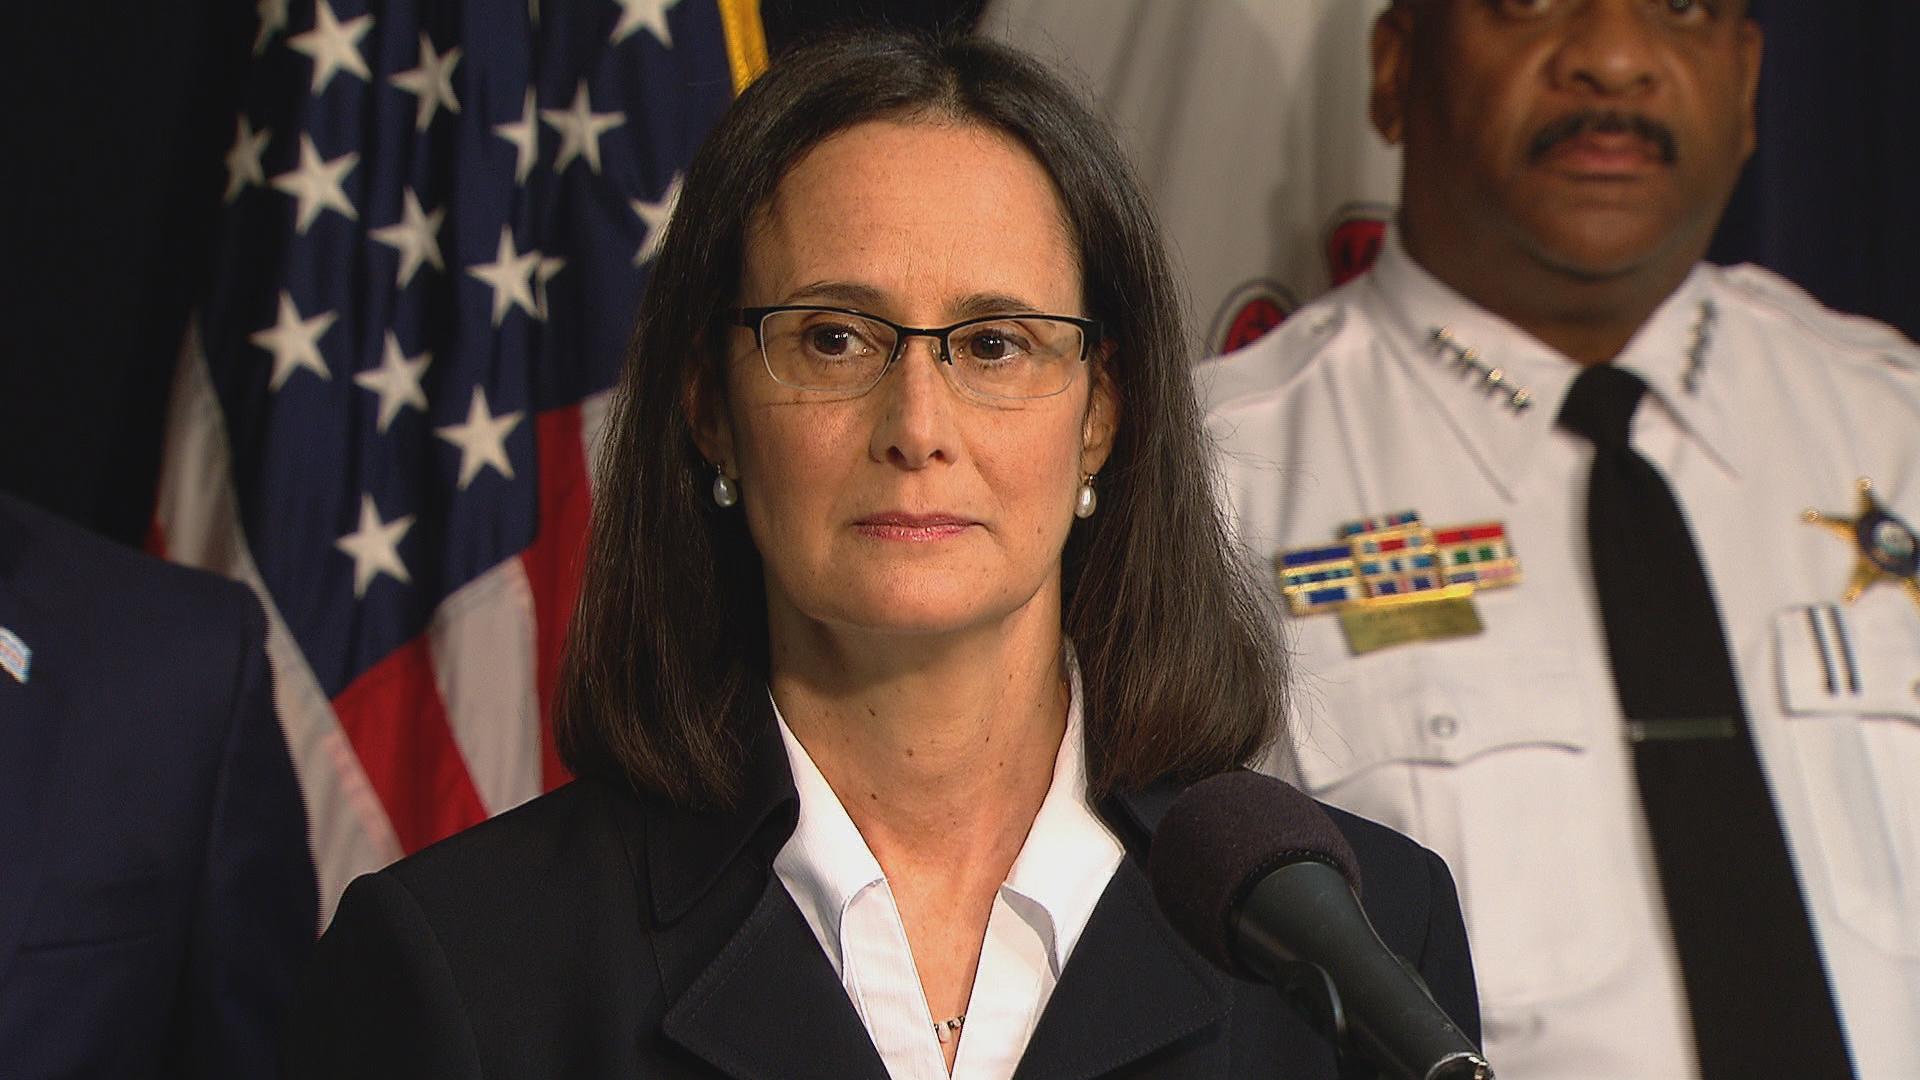 Illinois Attorney General Lisa Madigan announces a lawsuit against the city of Chicago on Aug. 29, 2017. “As the state attorney general, we are essentially stepping into the shoes of the Department of Justice,” she said.